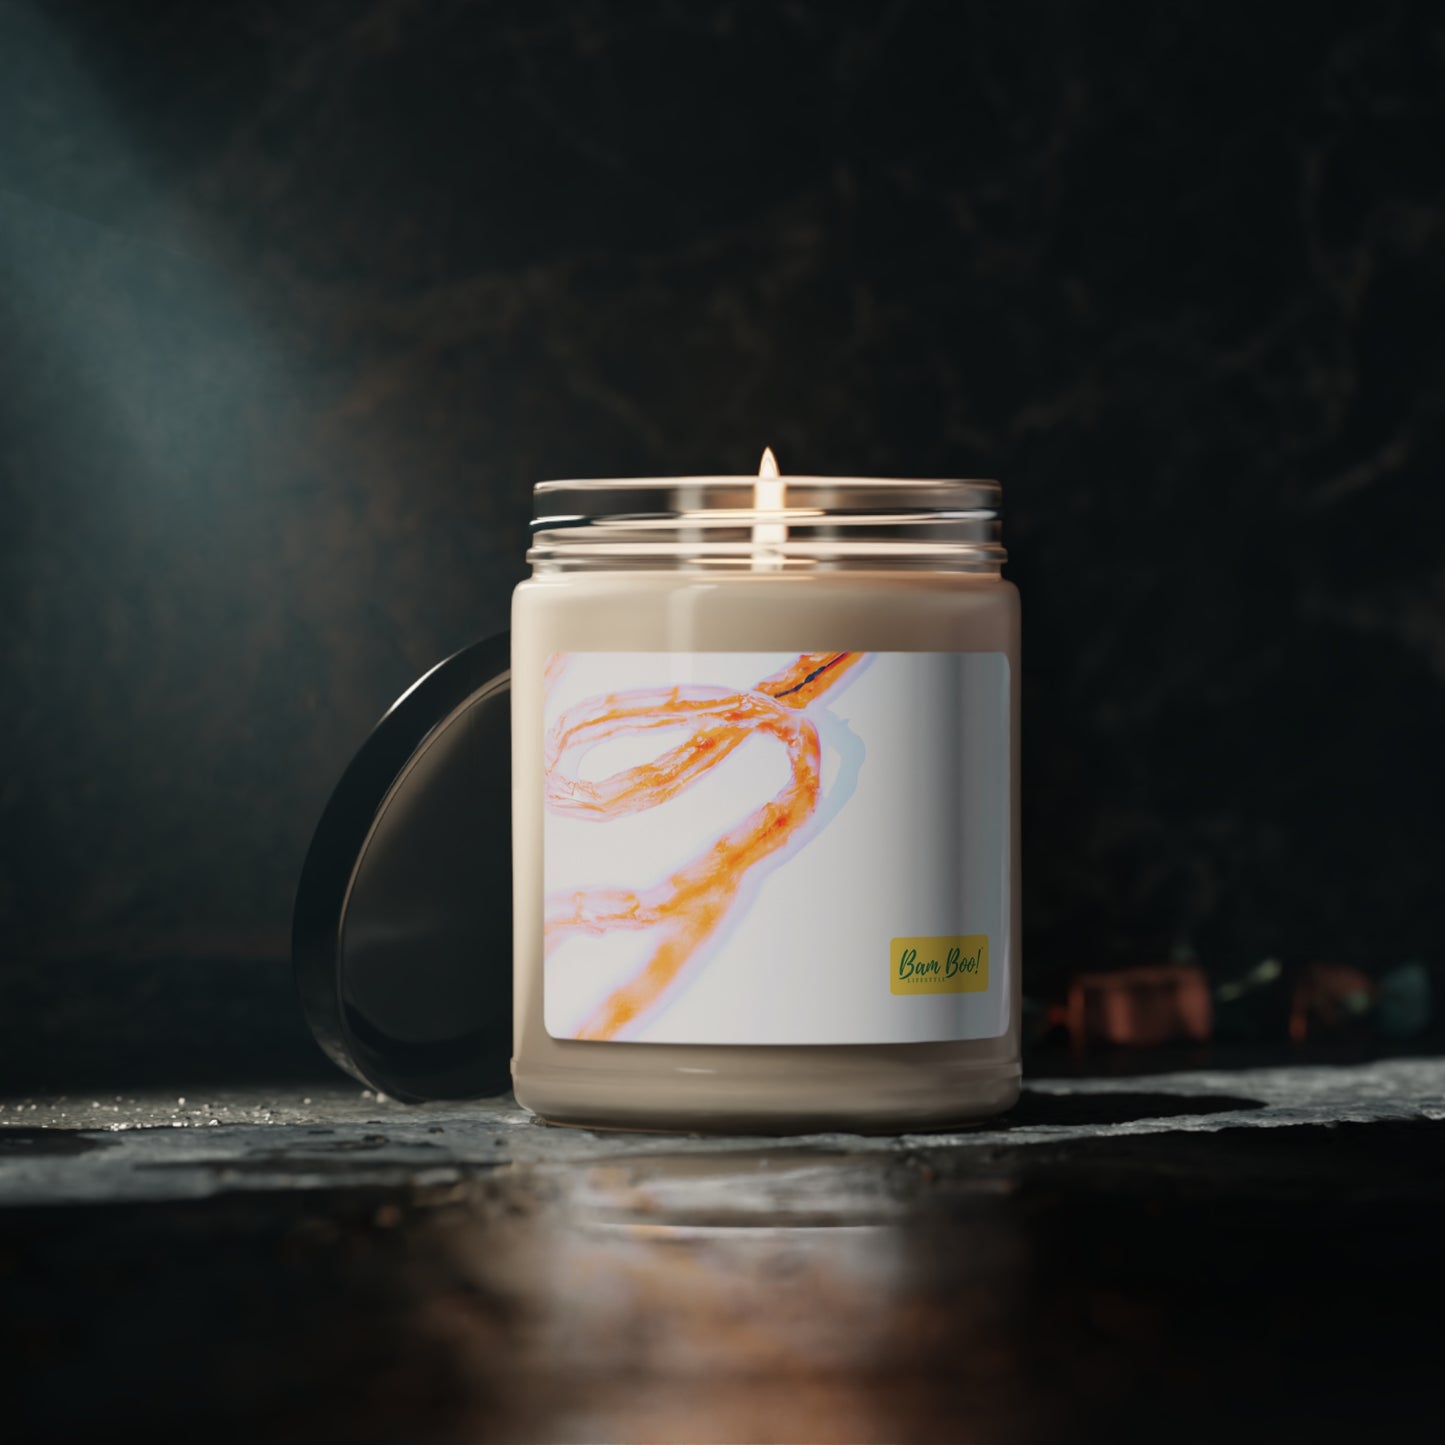 "Everyday Enchantment: Uncovering Hidden Beauty" - Bam Boo! Lifestyle Eco-friendly Soy Candle